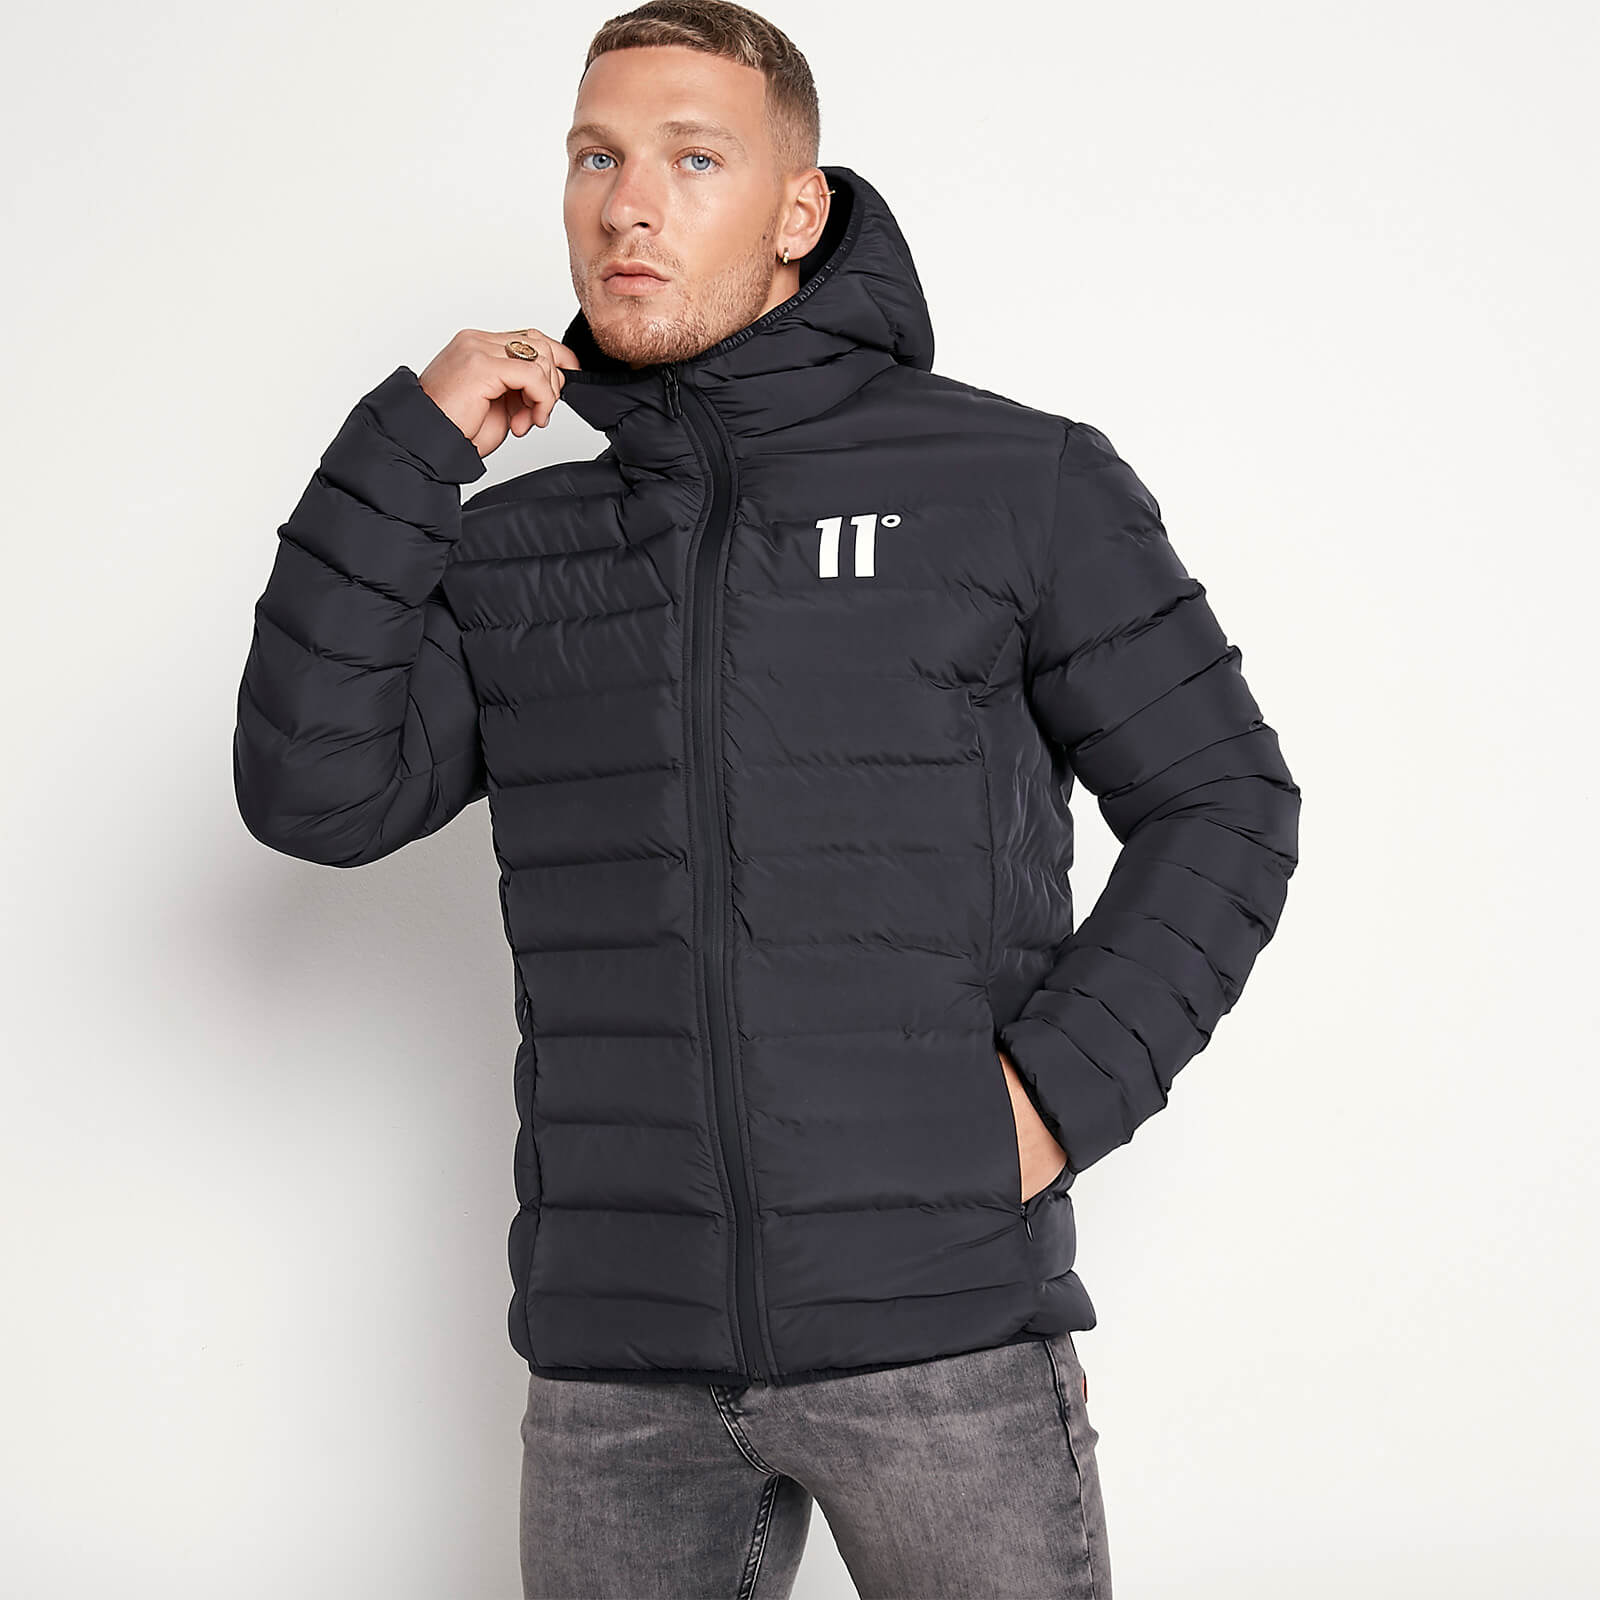 11 Degrees Space Jacket | 11 Degrees